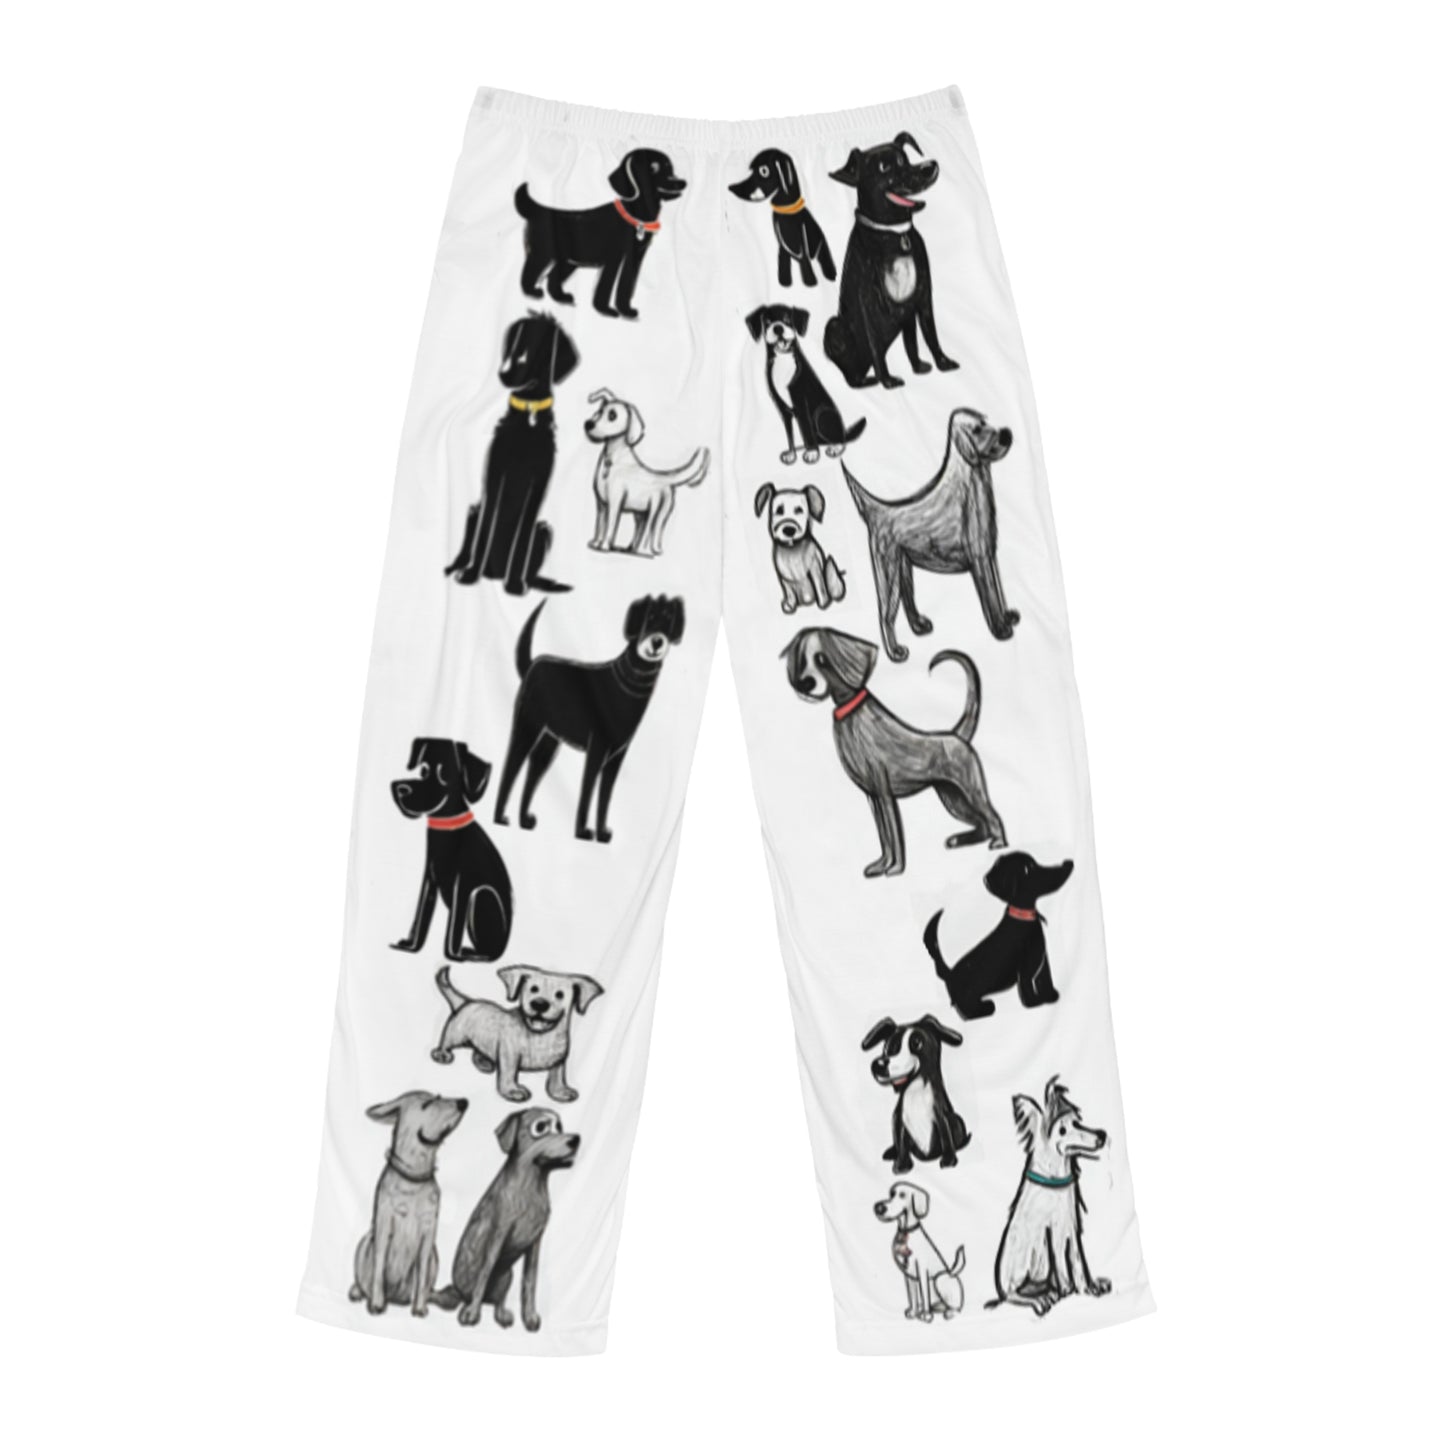 Doggy Men's PJ bottoms, Pajama Pants, Graphic PJs, Gifts for Him, Dog Dad Cute Cool